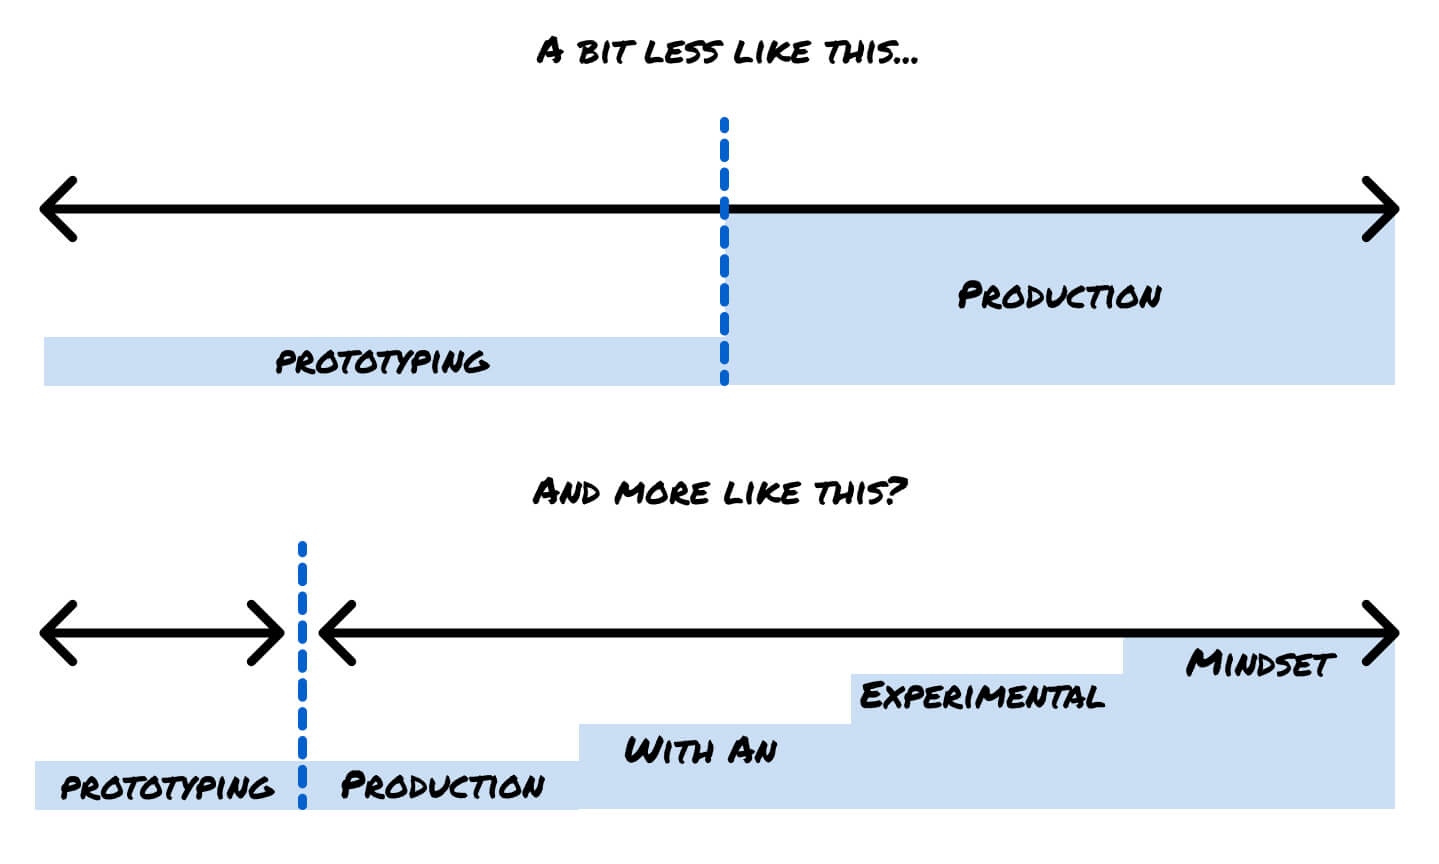 Two graphs, one depicting prototyping and production as binaries, and another depicting them on a spectrum, with the text, production with an experimental mindset